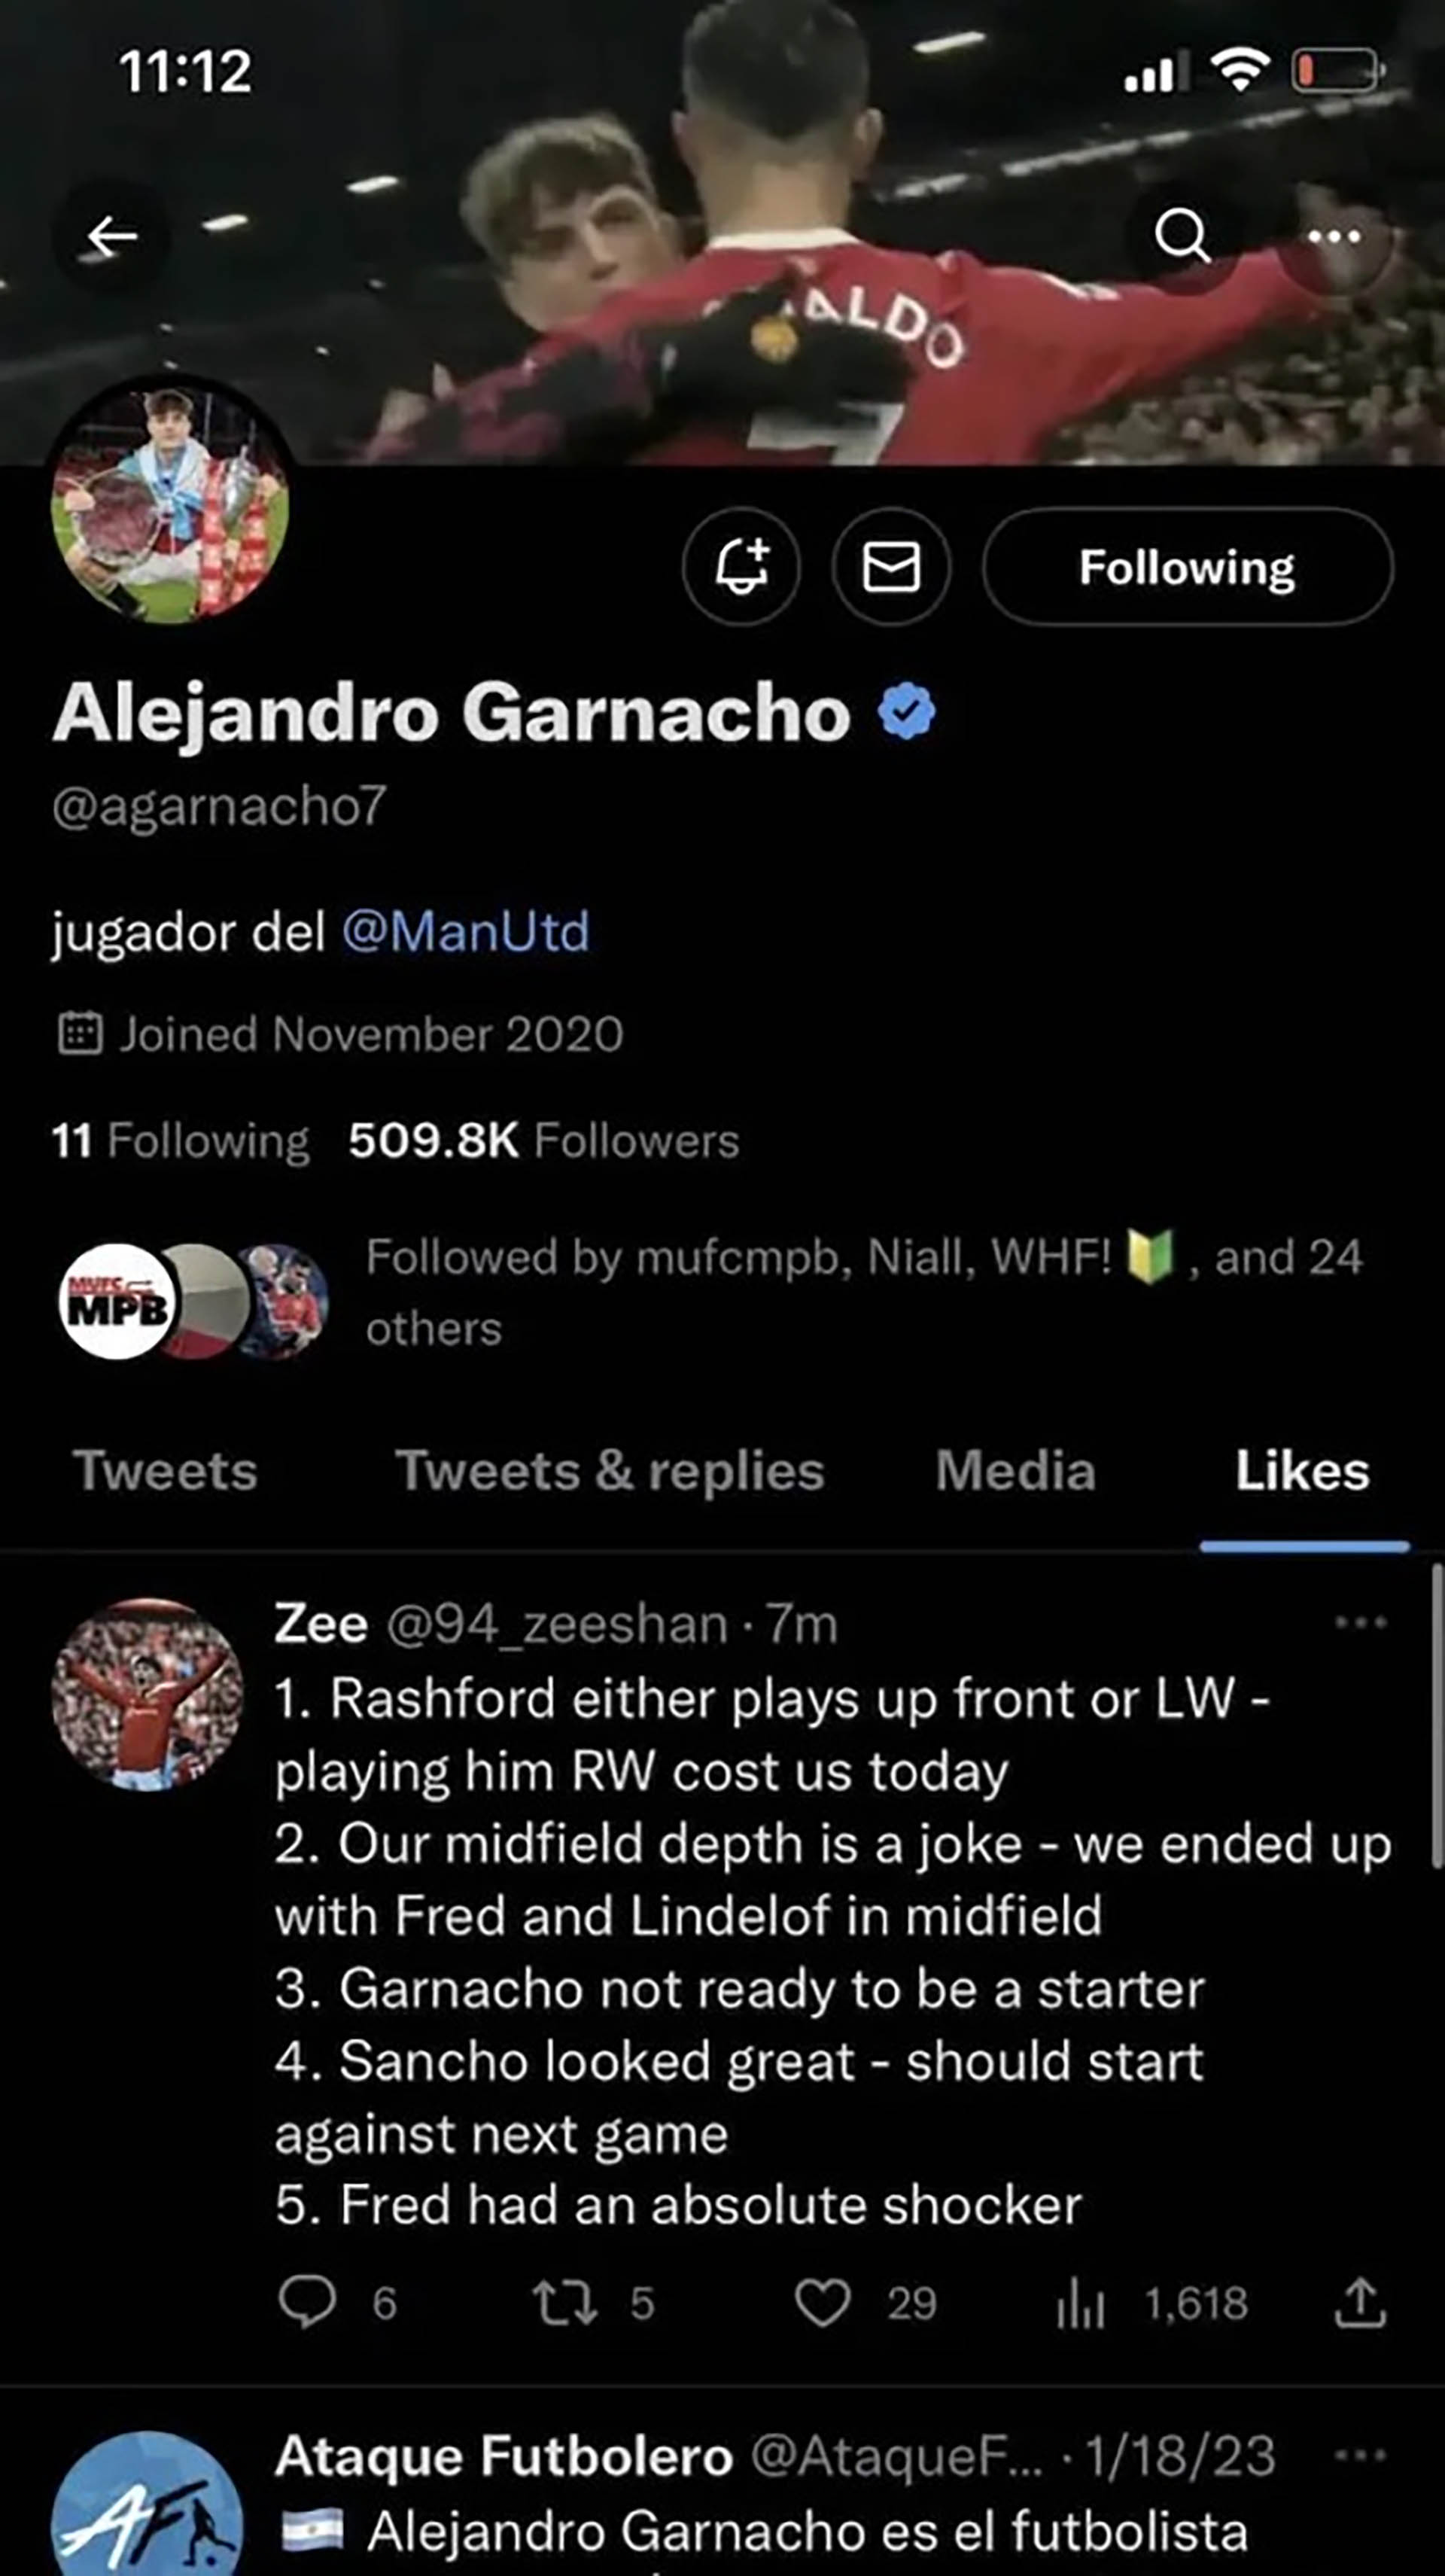 The striking publication of Garnacho after being a starter at Manchester United